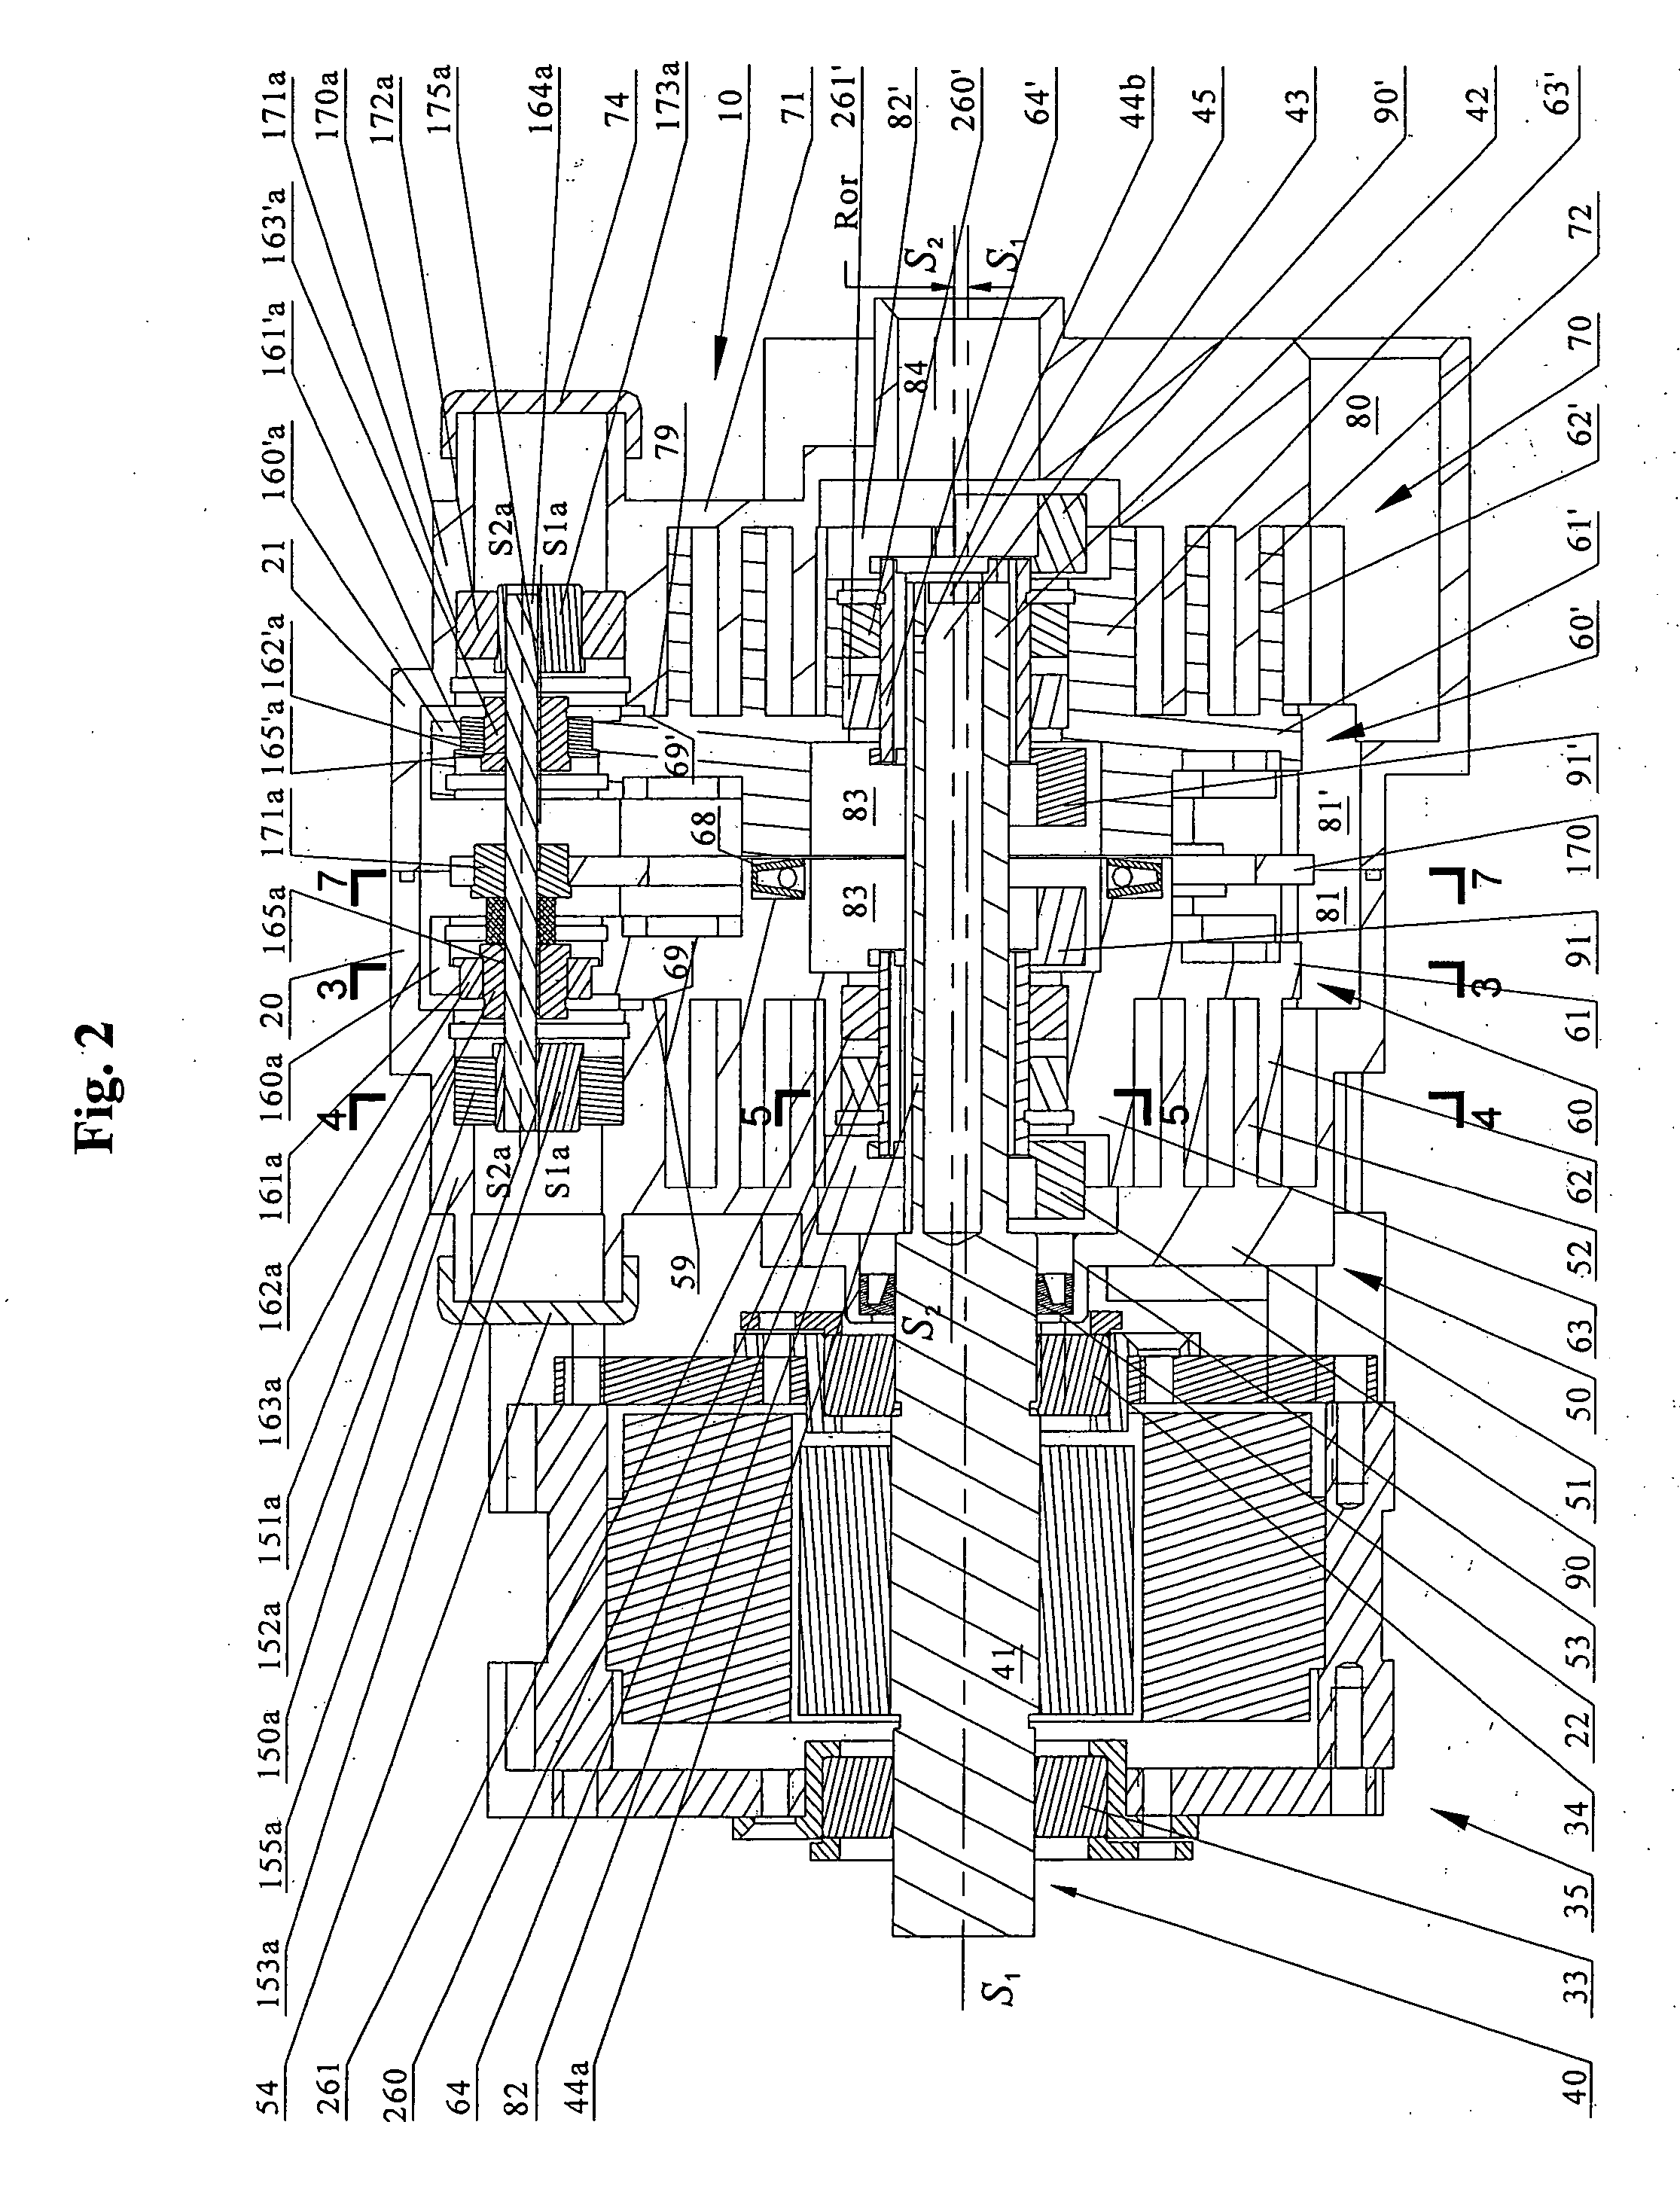 Scroll-type fluid displacement apparatus with fully compliant floating scrolls